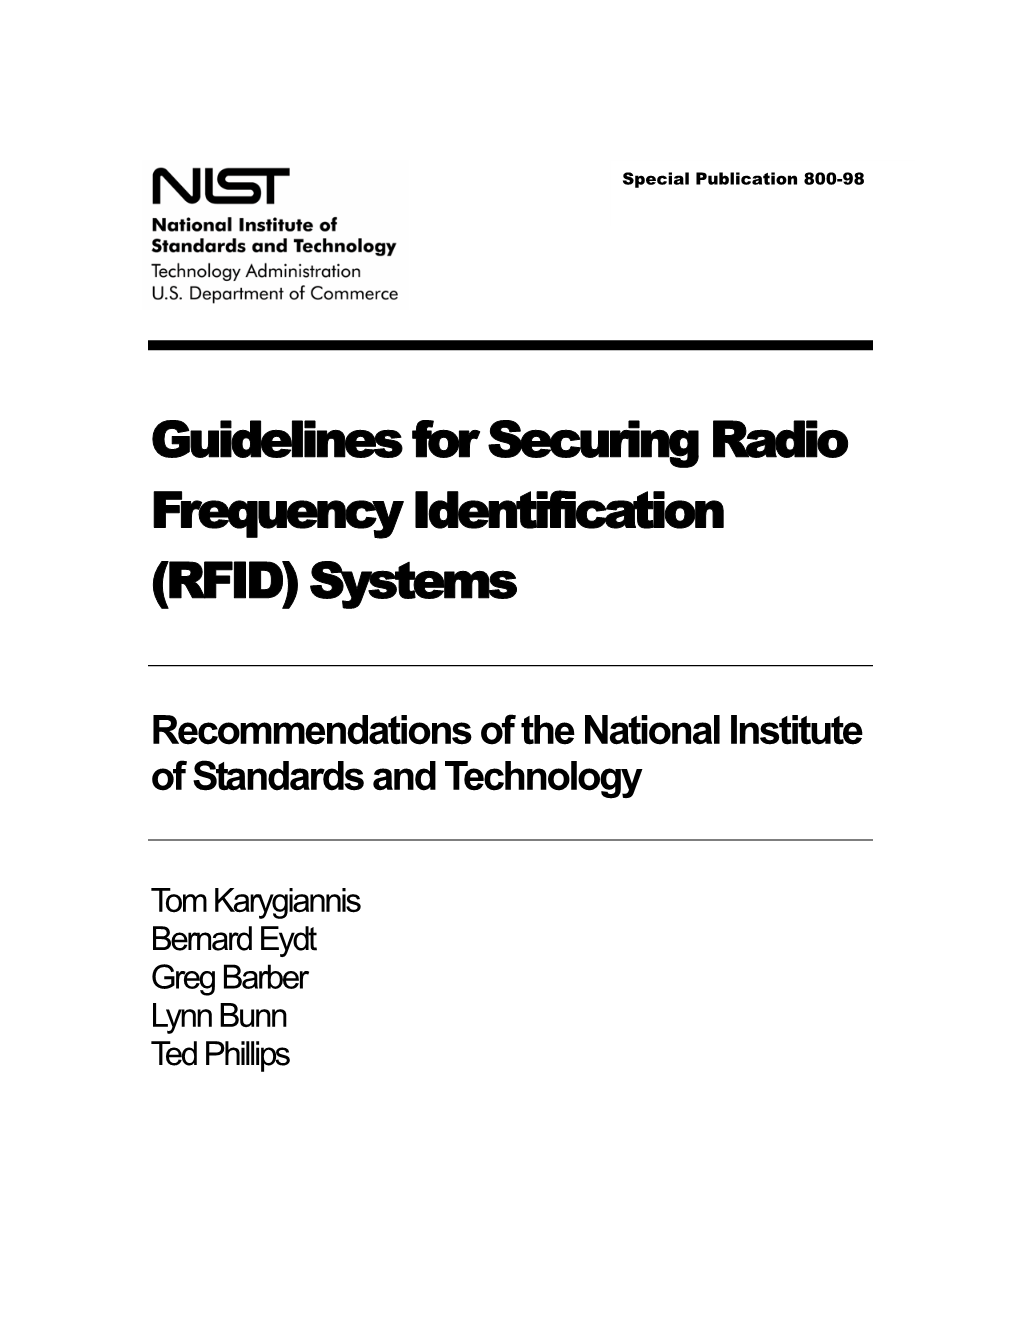 Guidelines for Securing Radio Frequency Identification (RFID) Systems